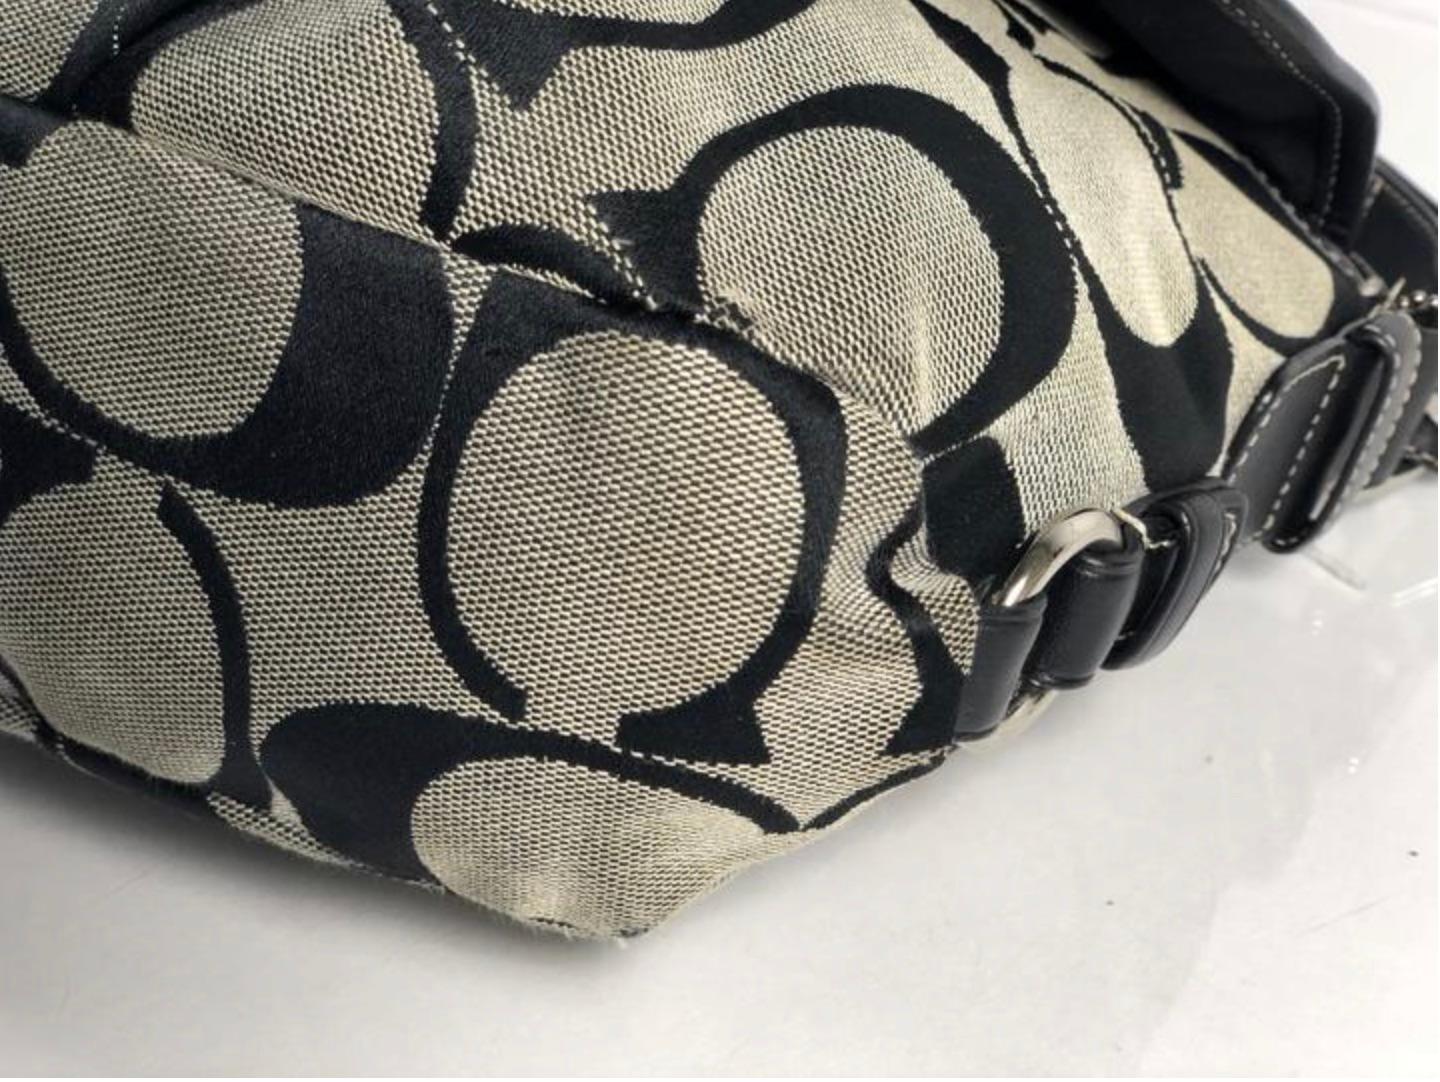 Coach Signature Jacquard Canvas Duffle Crossbody Shoulder Handbag In Good Condition For Sale In Saint Charles, IL